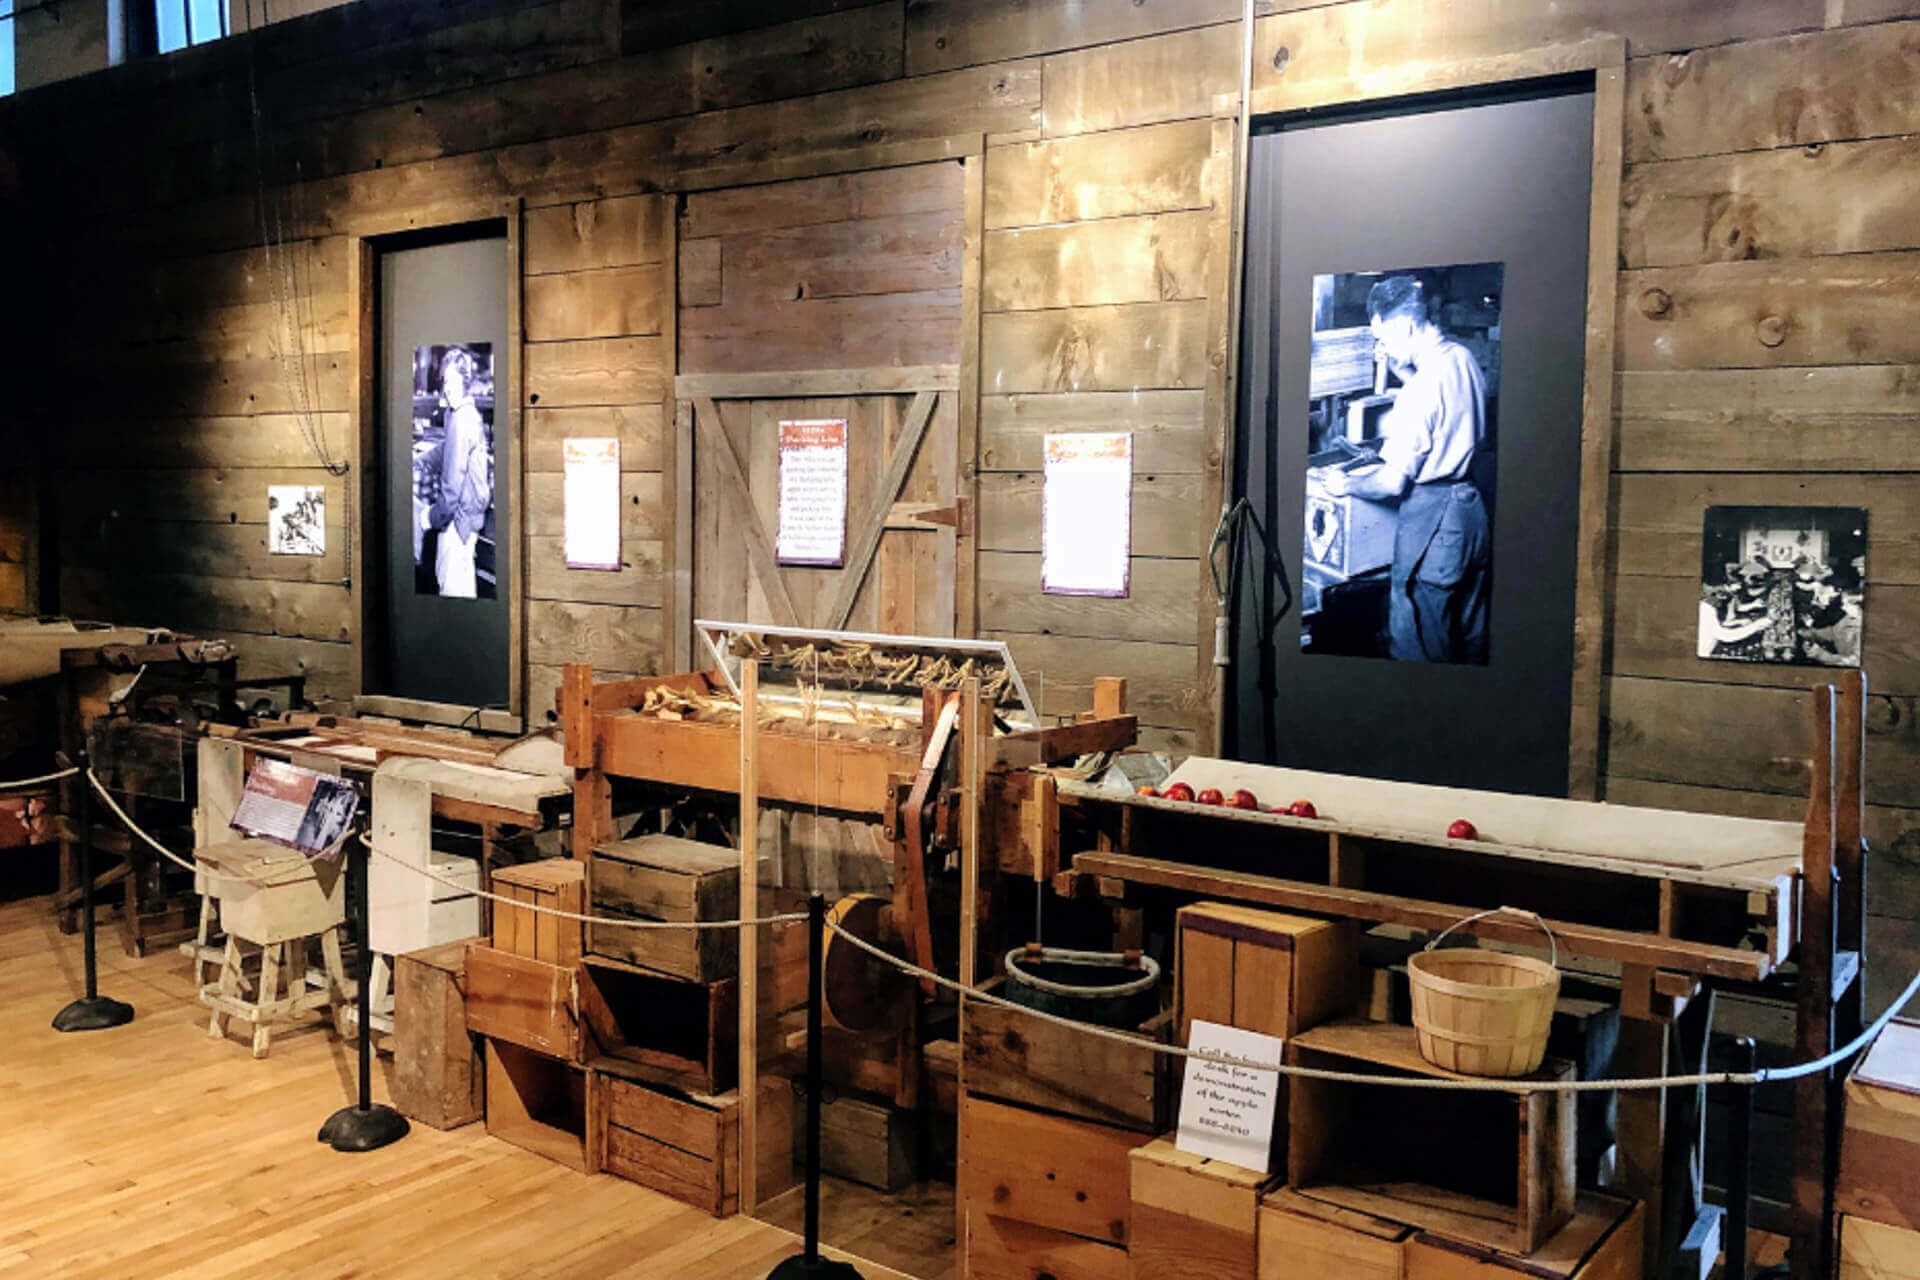 An exhibit on apple sorting at the Wenatchee Valley Museum and Cultural Center.